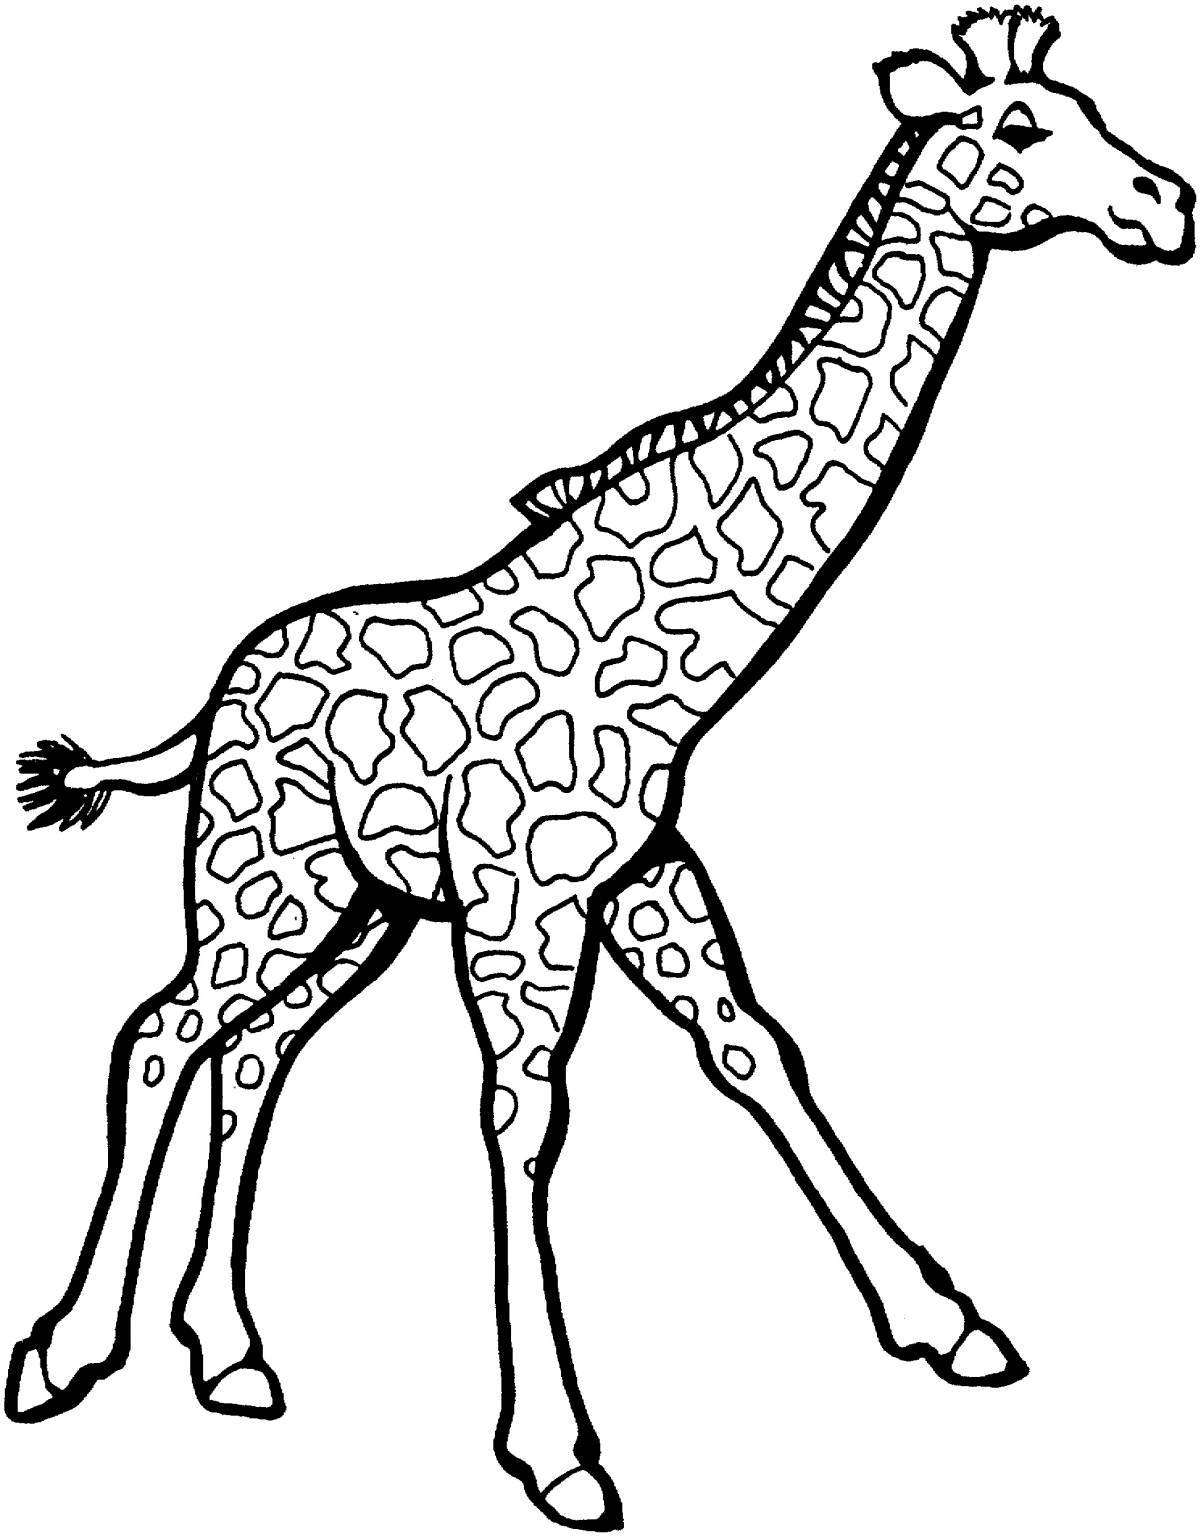 Colorful giraffe coloring page for kids